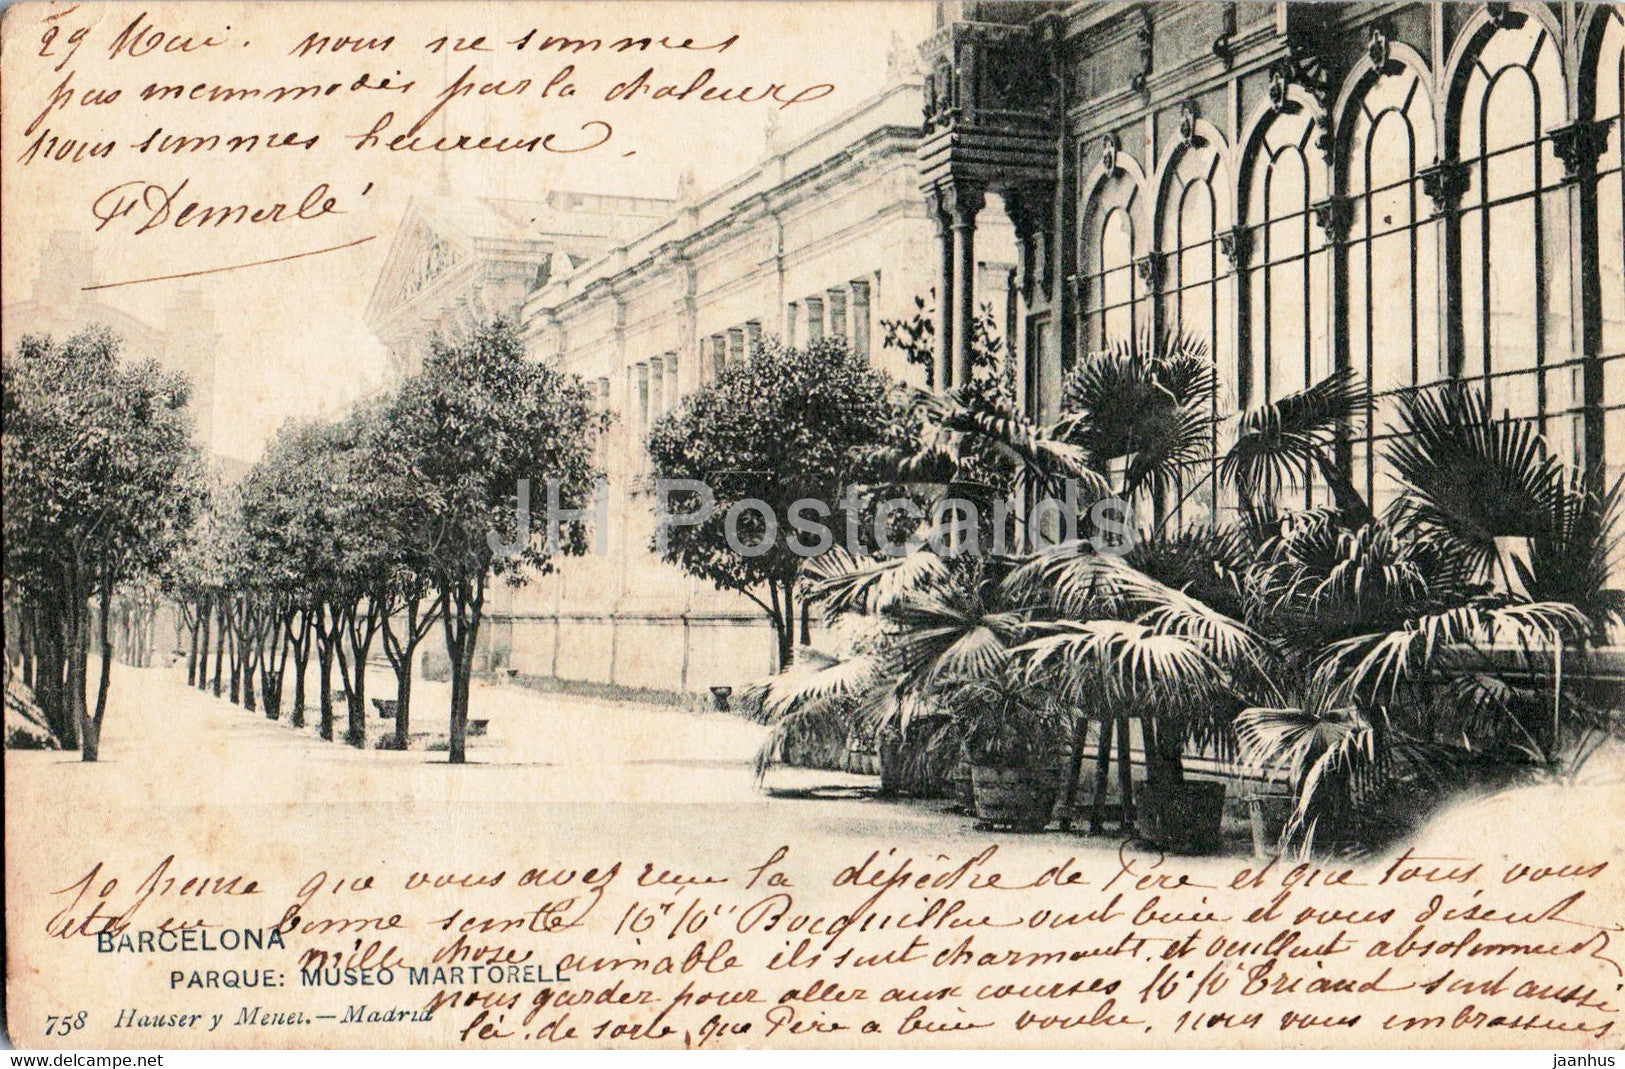 Barcelona - Museo Martorell - museum - 758 - old postcard - Spain - used - JH Postcards